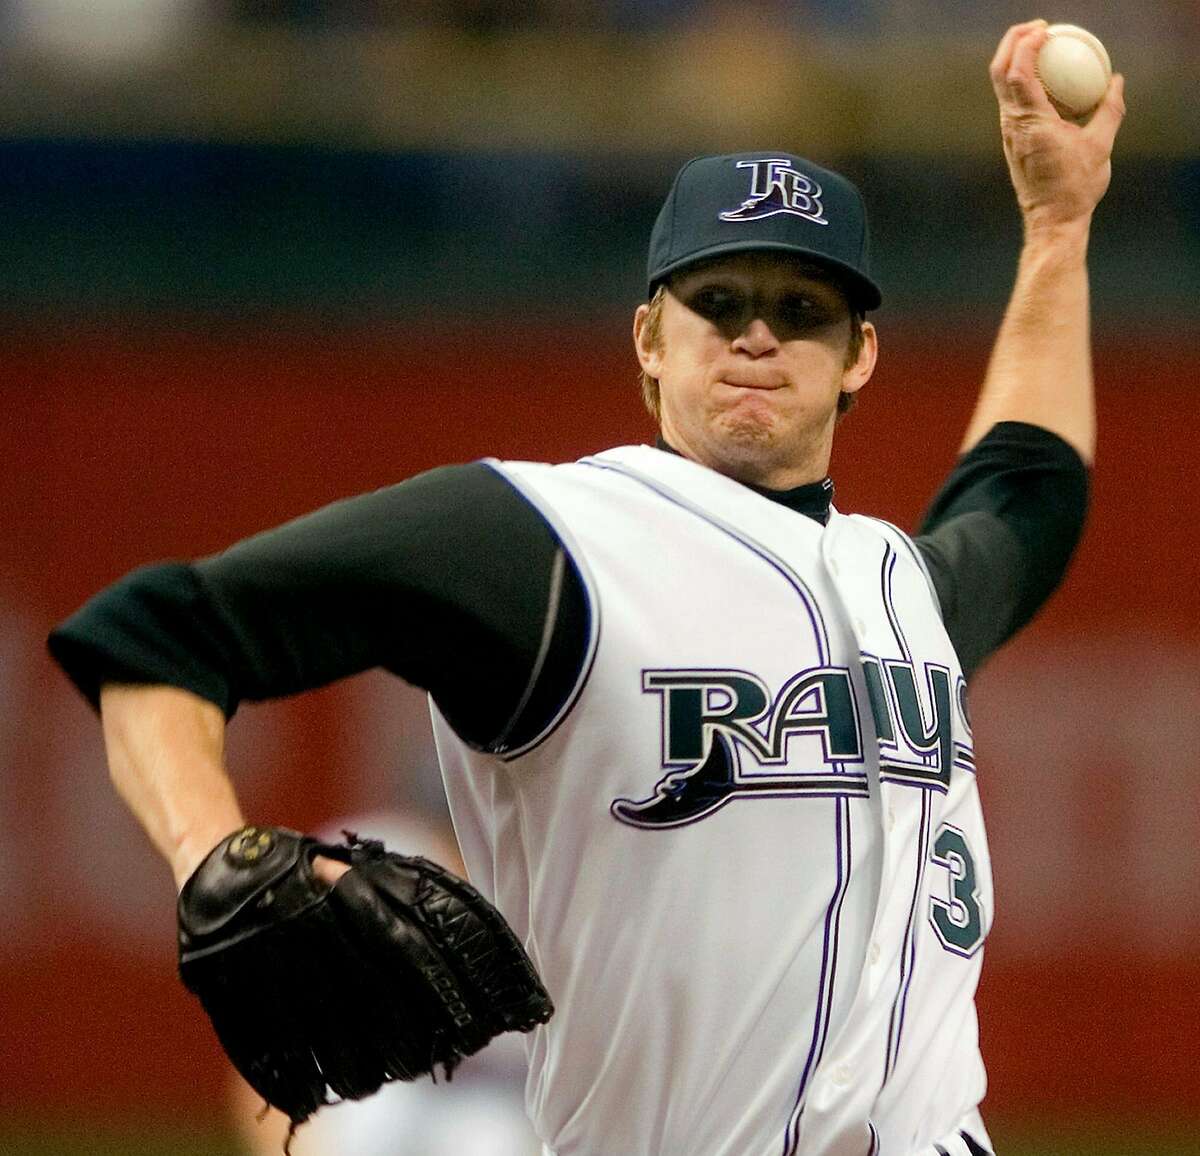 Tampa Bay Devil Rays starter J.P. Howell pitches against the Kansas City Royals during the first inning of a baseball game Sunday, June 3, 2007. in St. Petersburg, Fla. The Devil Rays beat the Royals 5-1. (AP Photo/Steve Nesius)